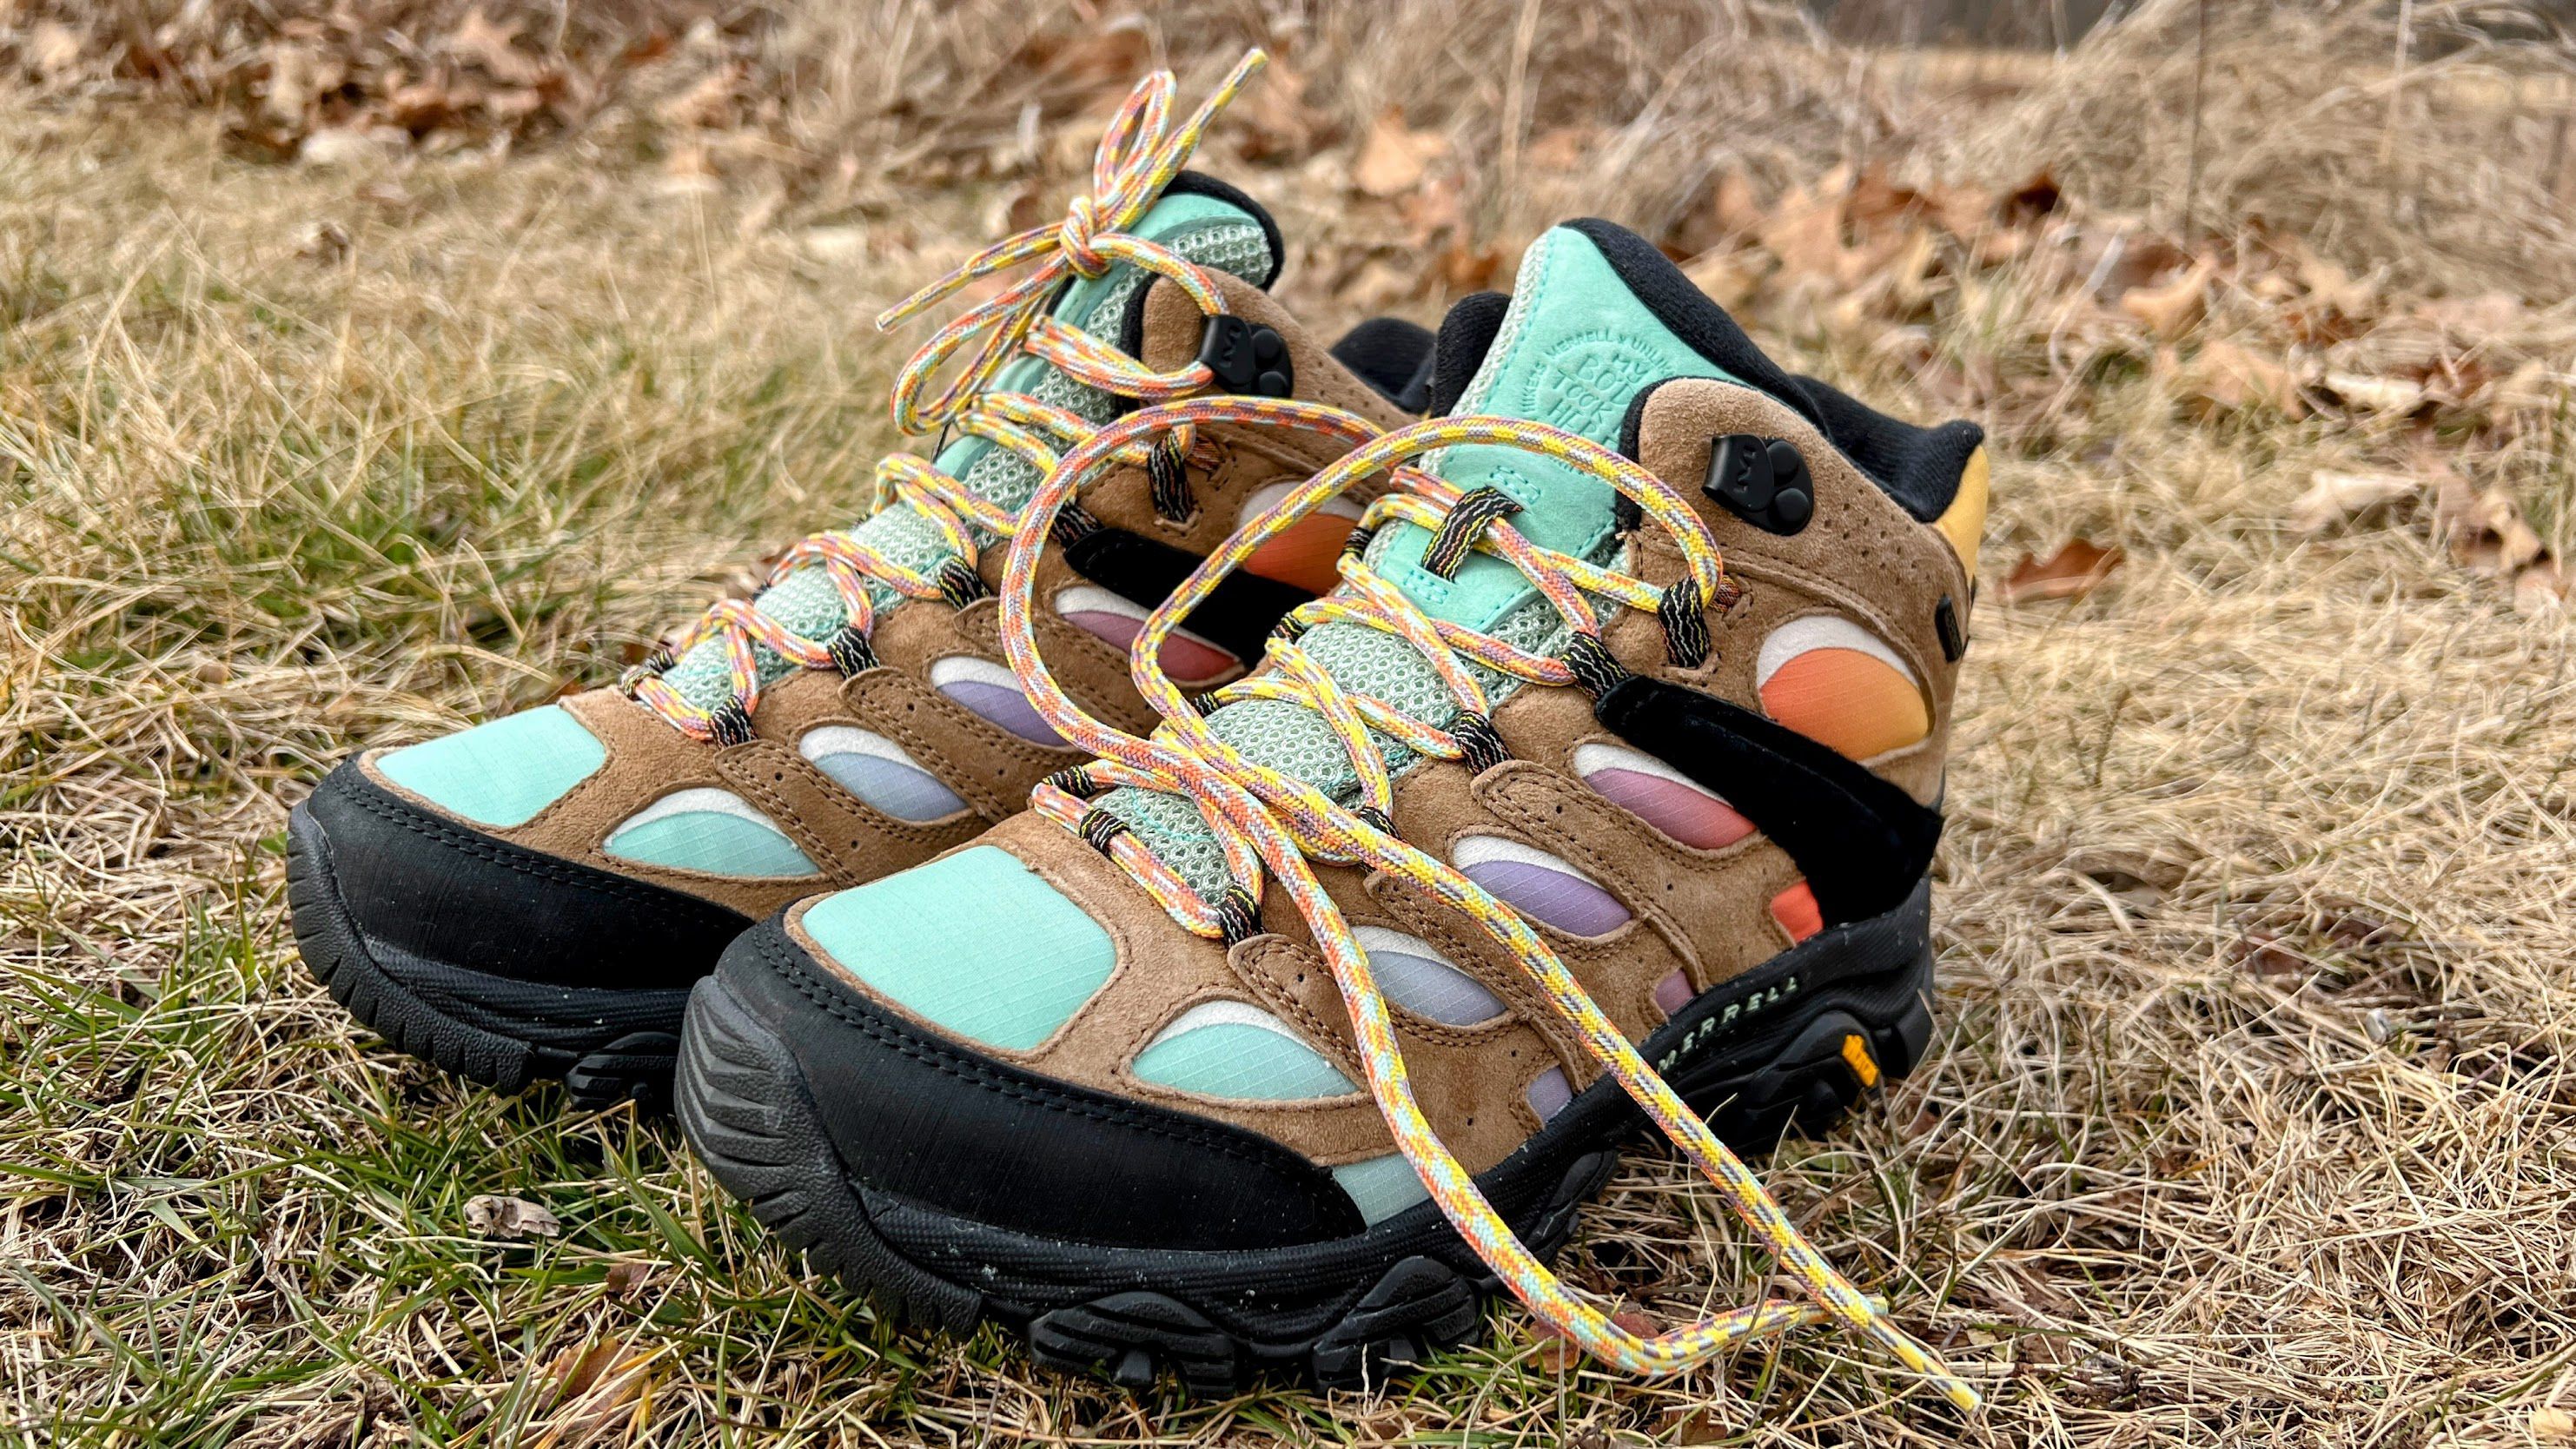 Moab 3 Hiking Boots & Shoes